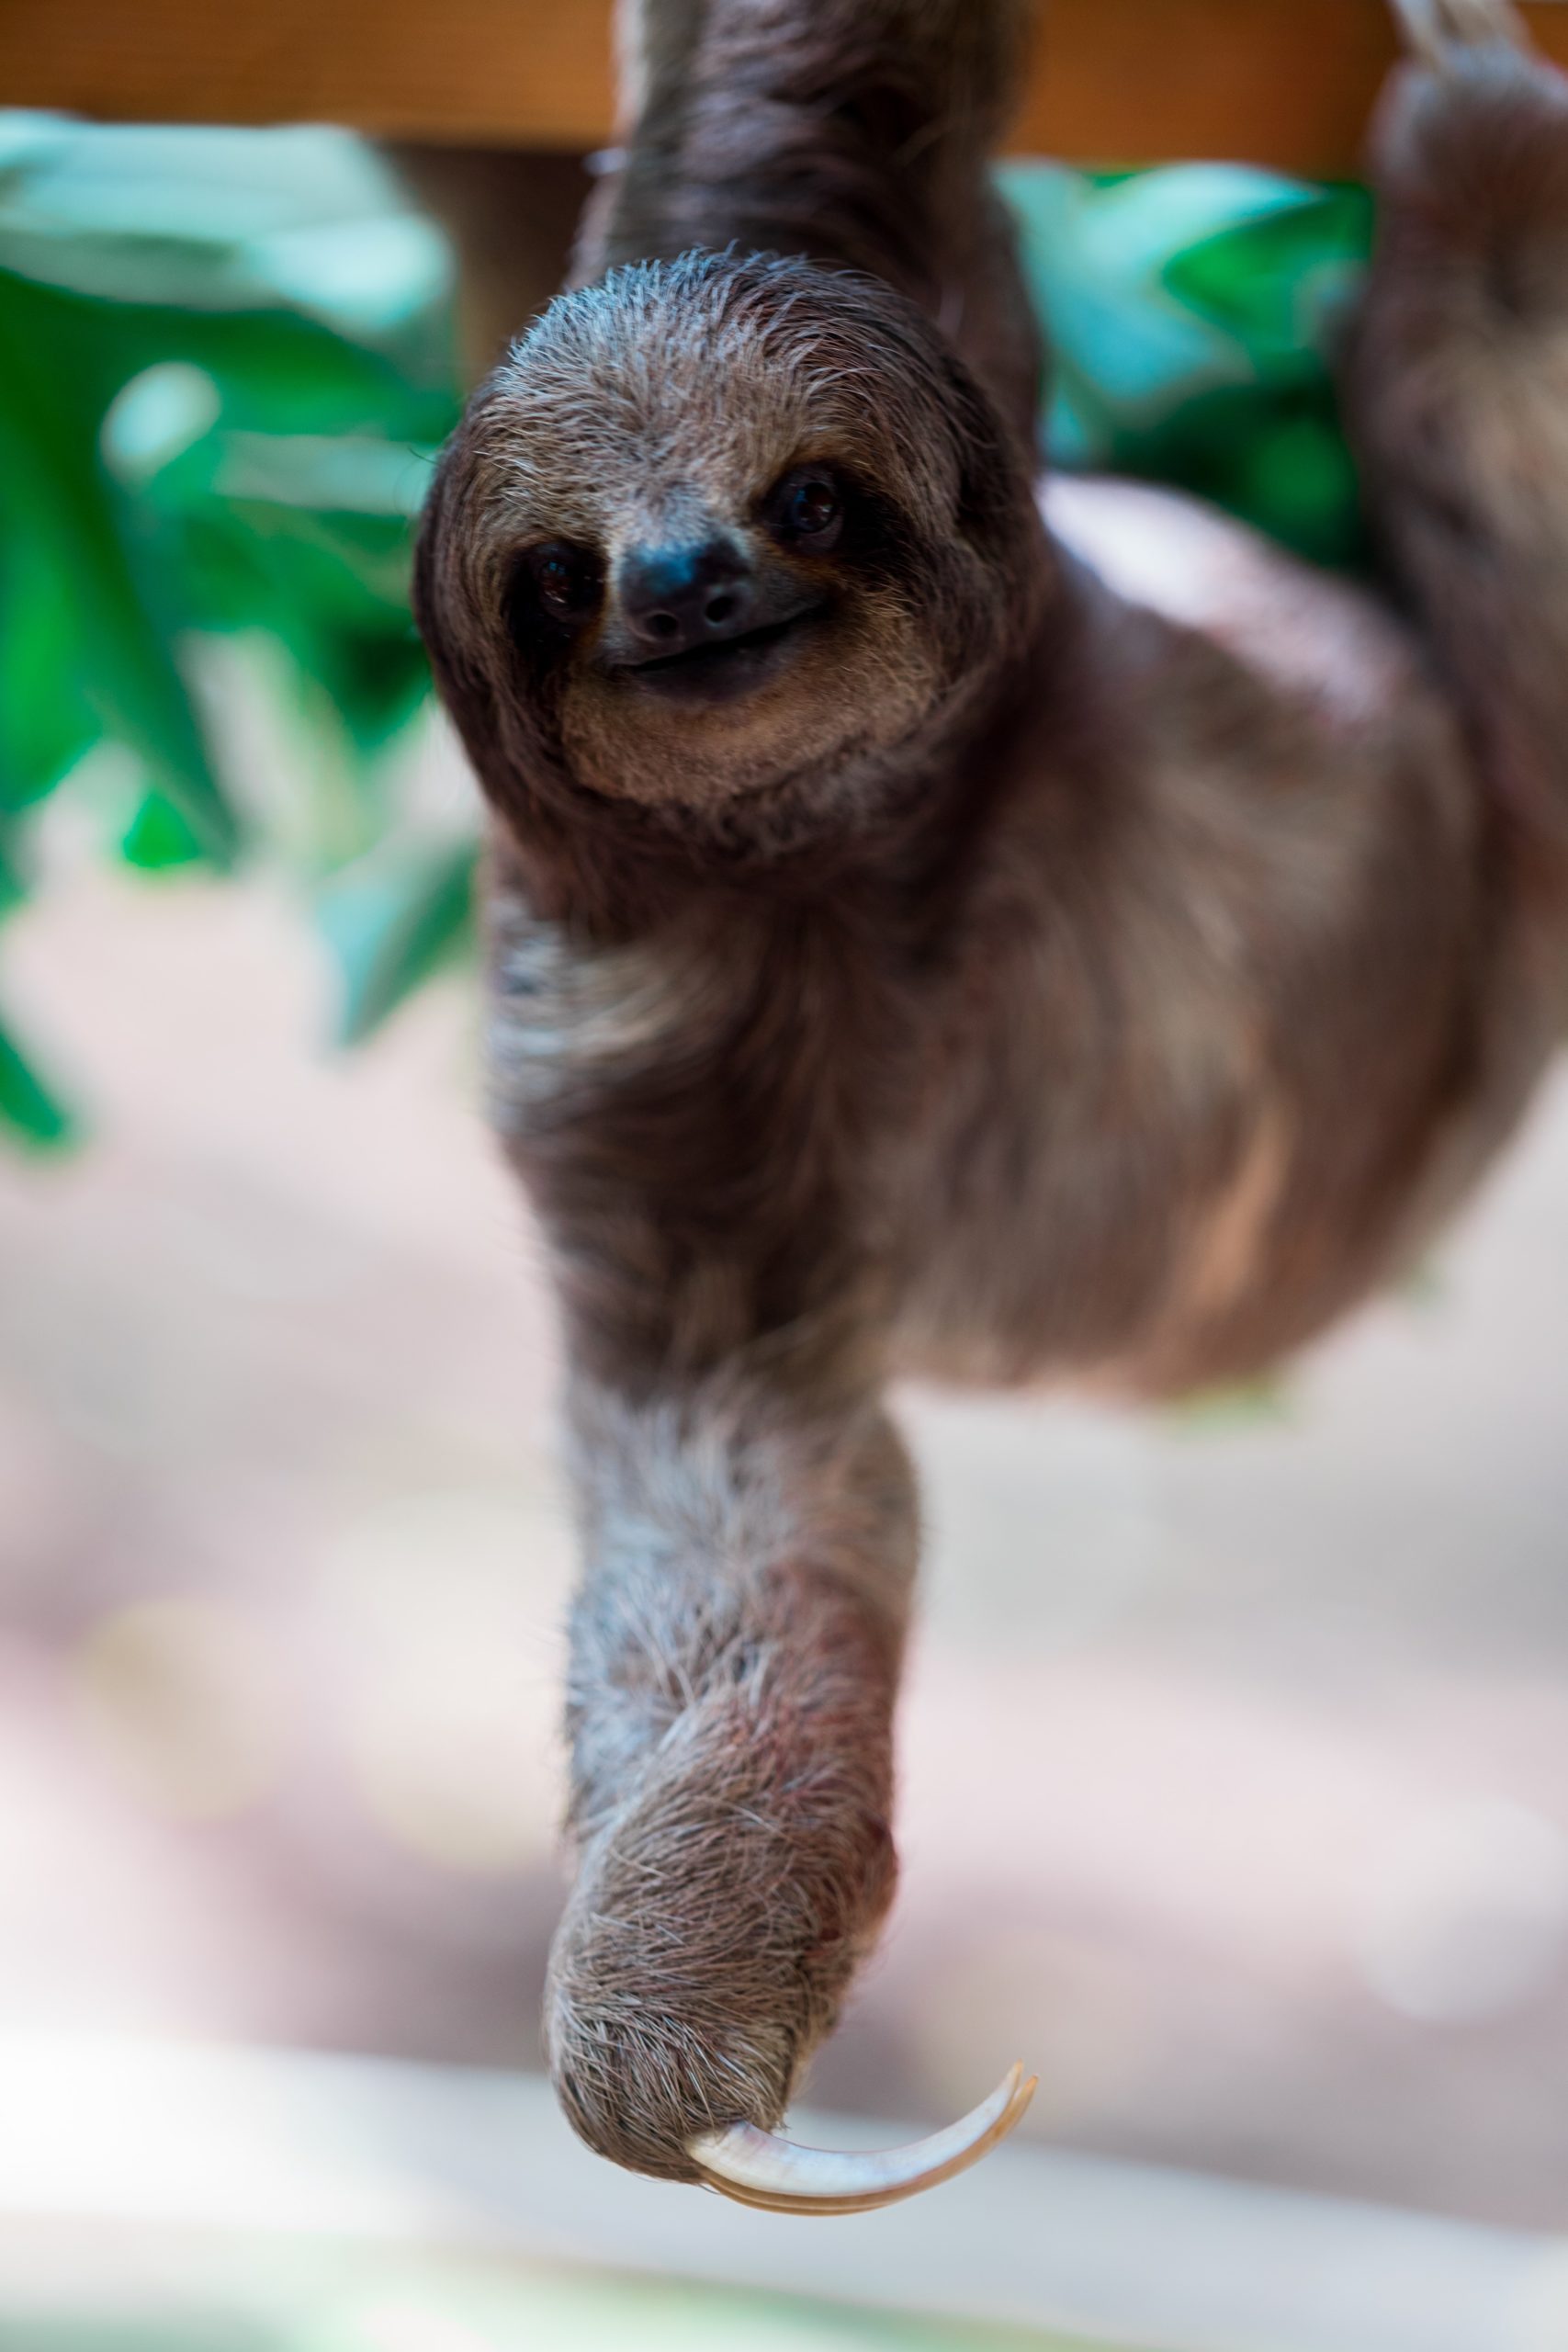 Sloth slow moving